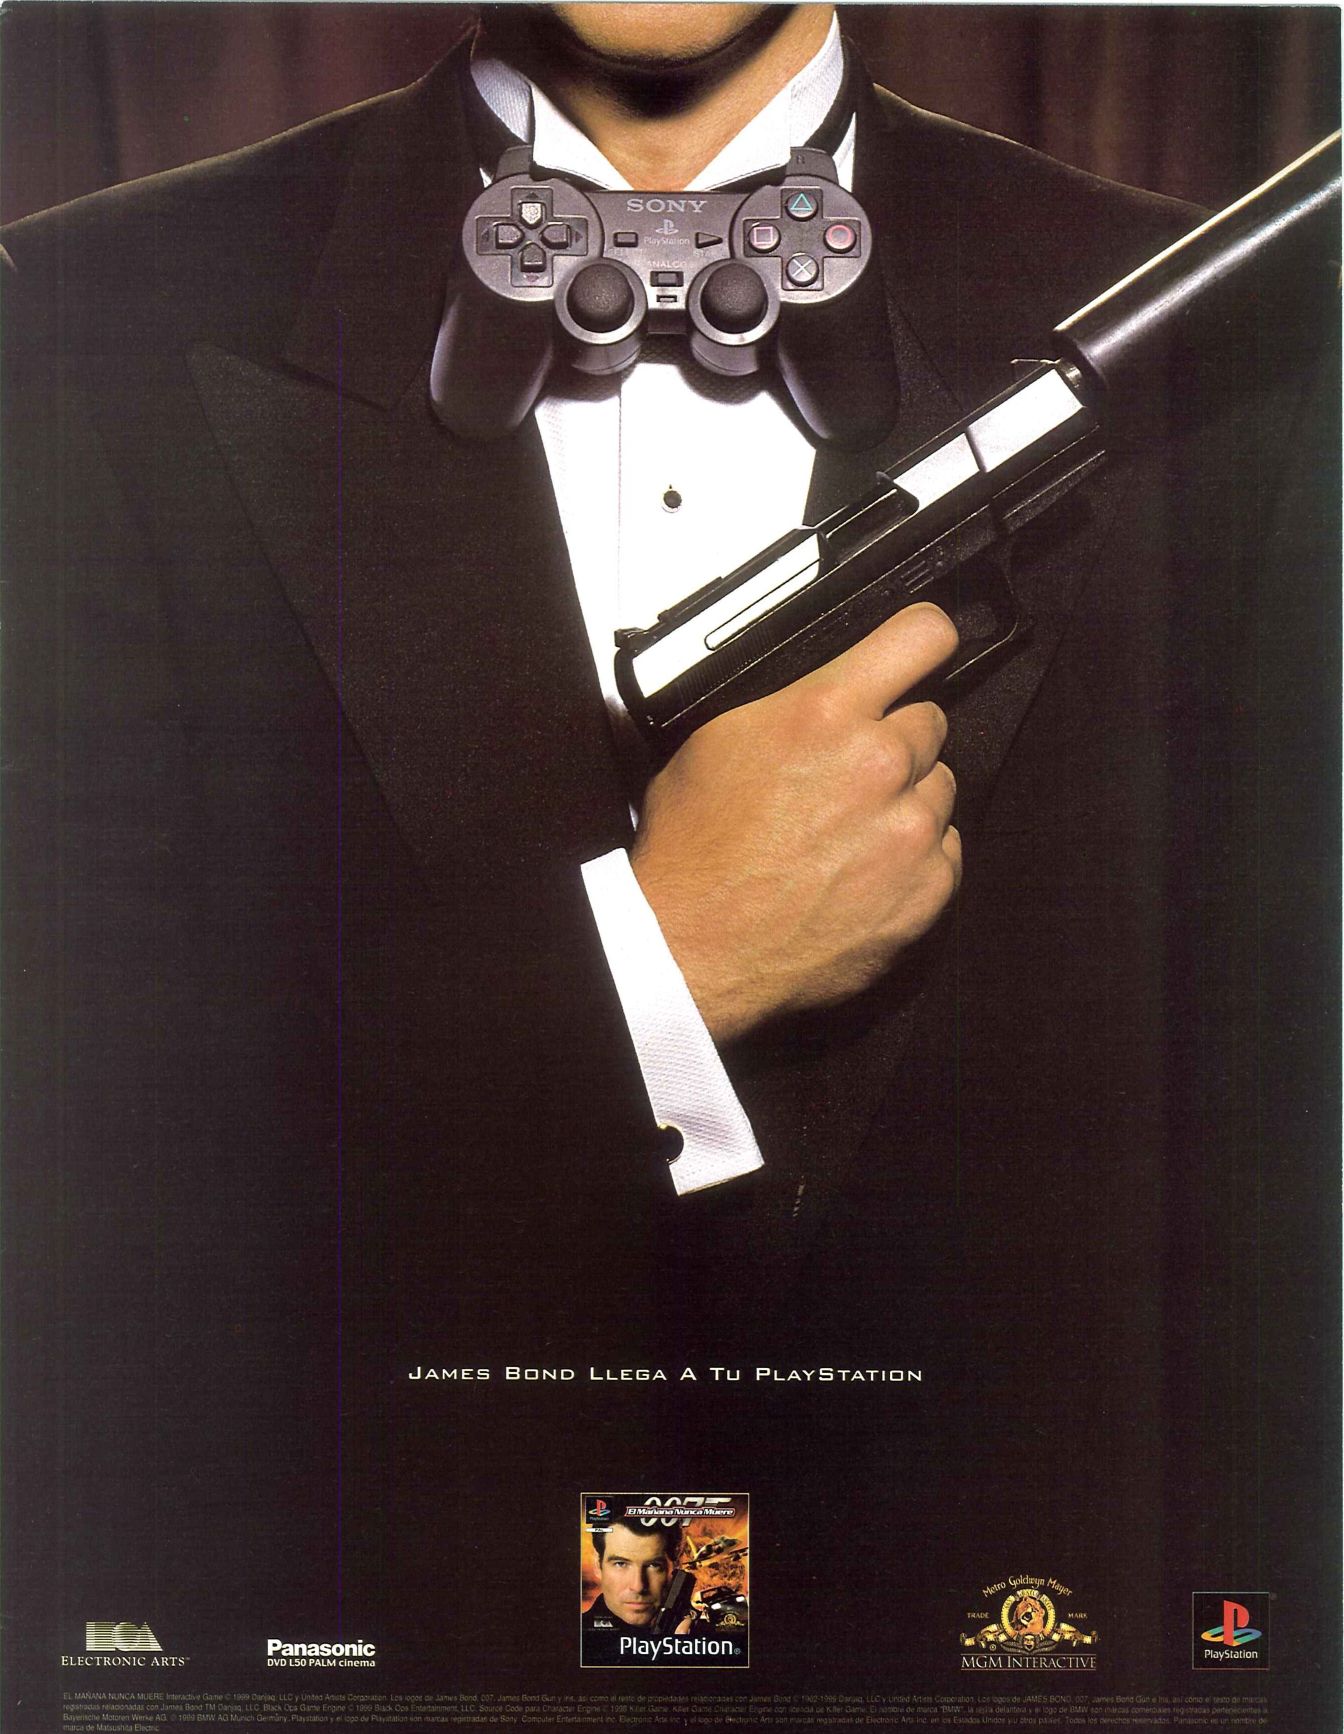 007 - Tomorrow never dies PSX cover